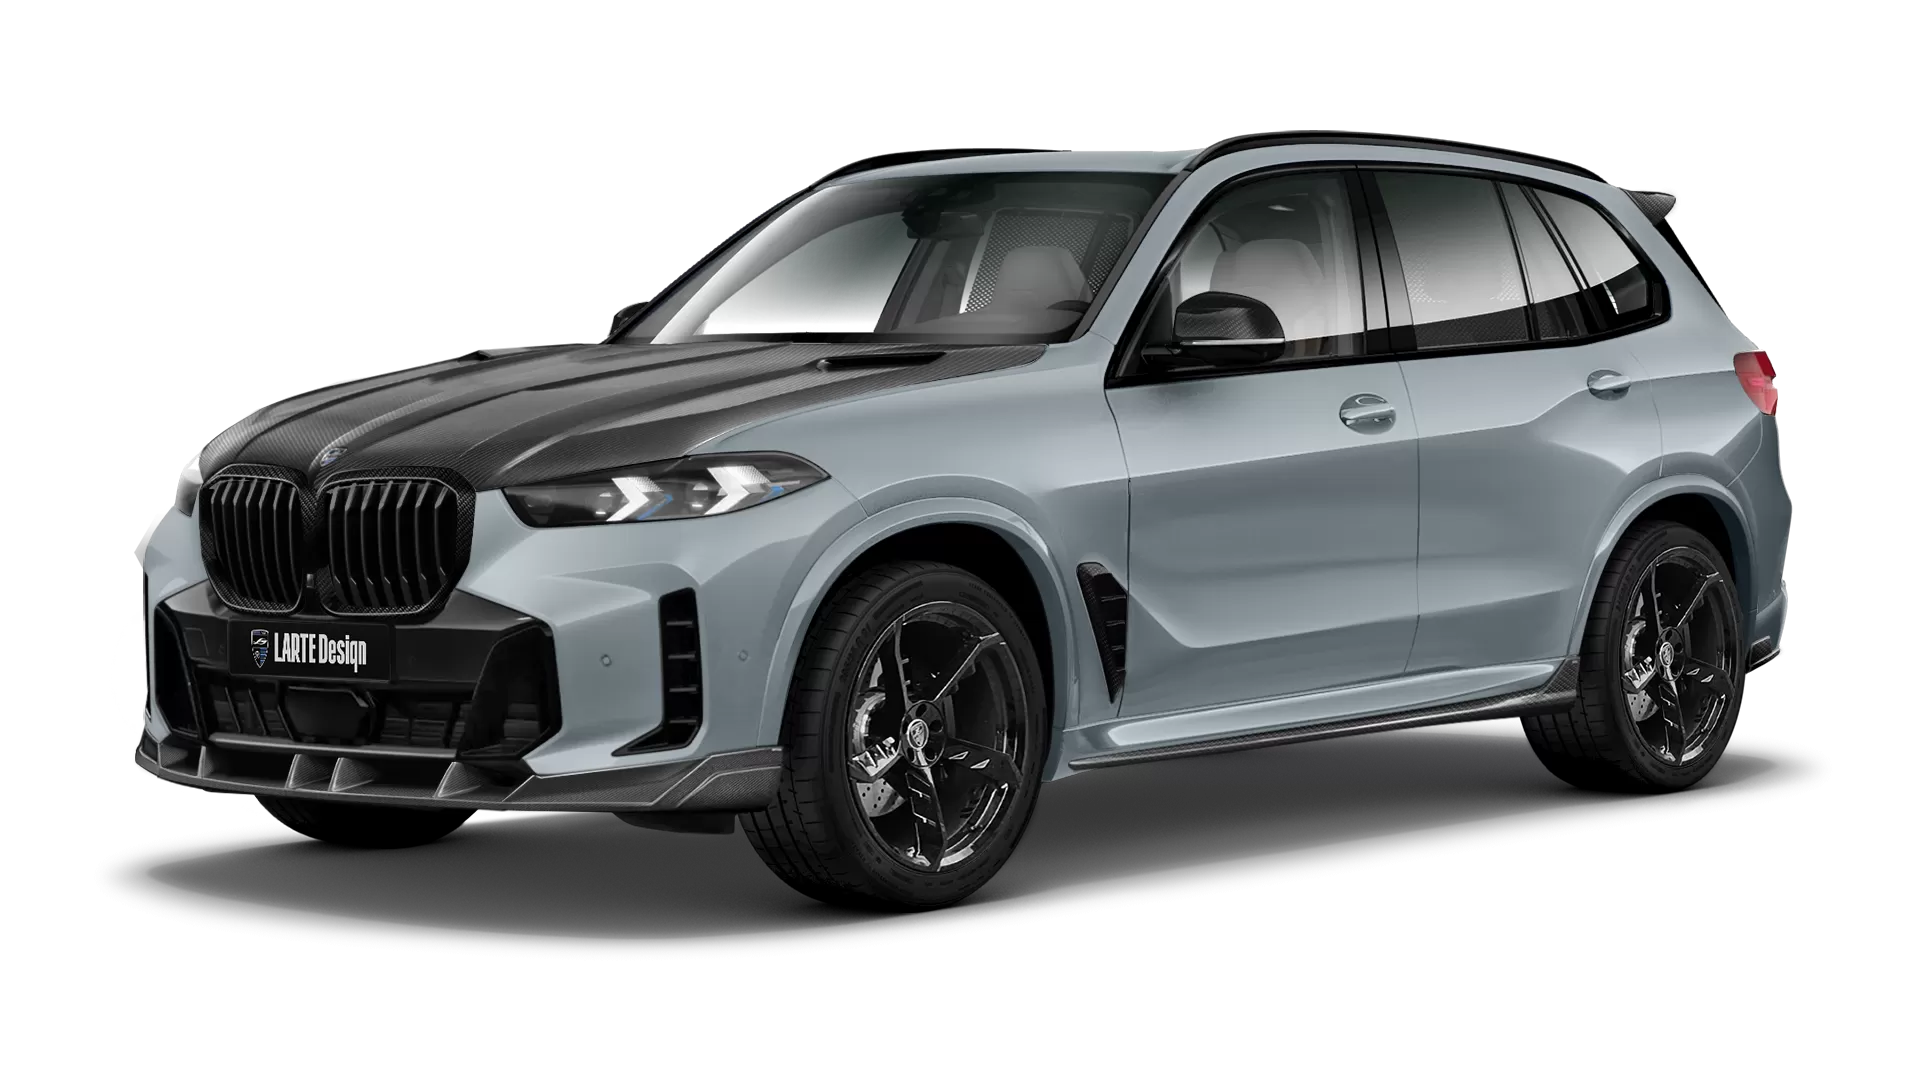 BMW X5 G05 LCI Facelift with carbon body kit: front view shown in Frozen Pure Grey